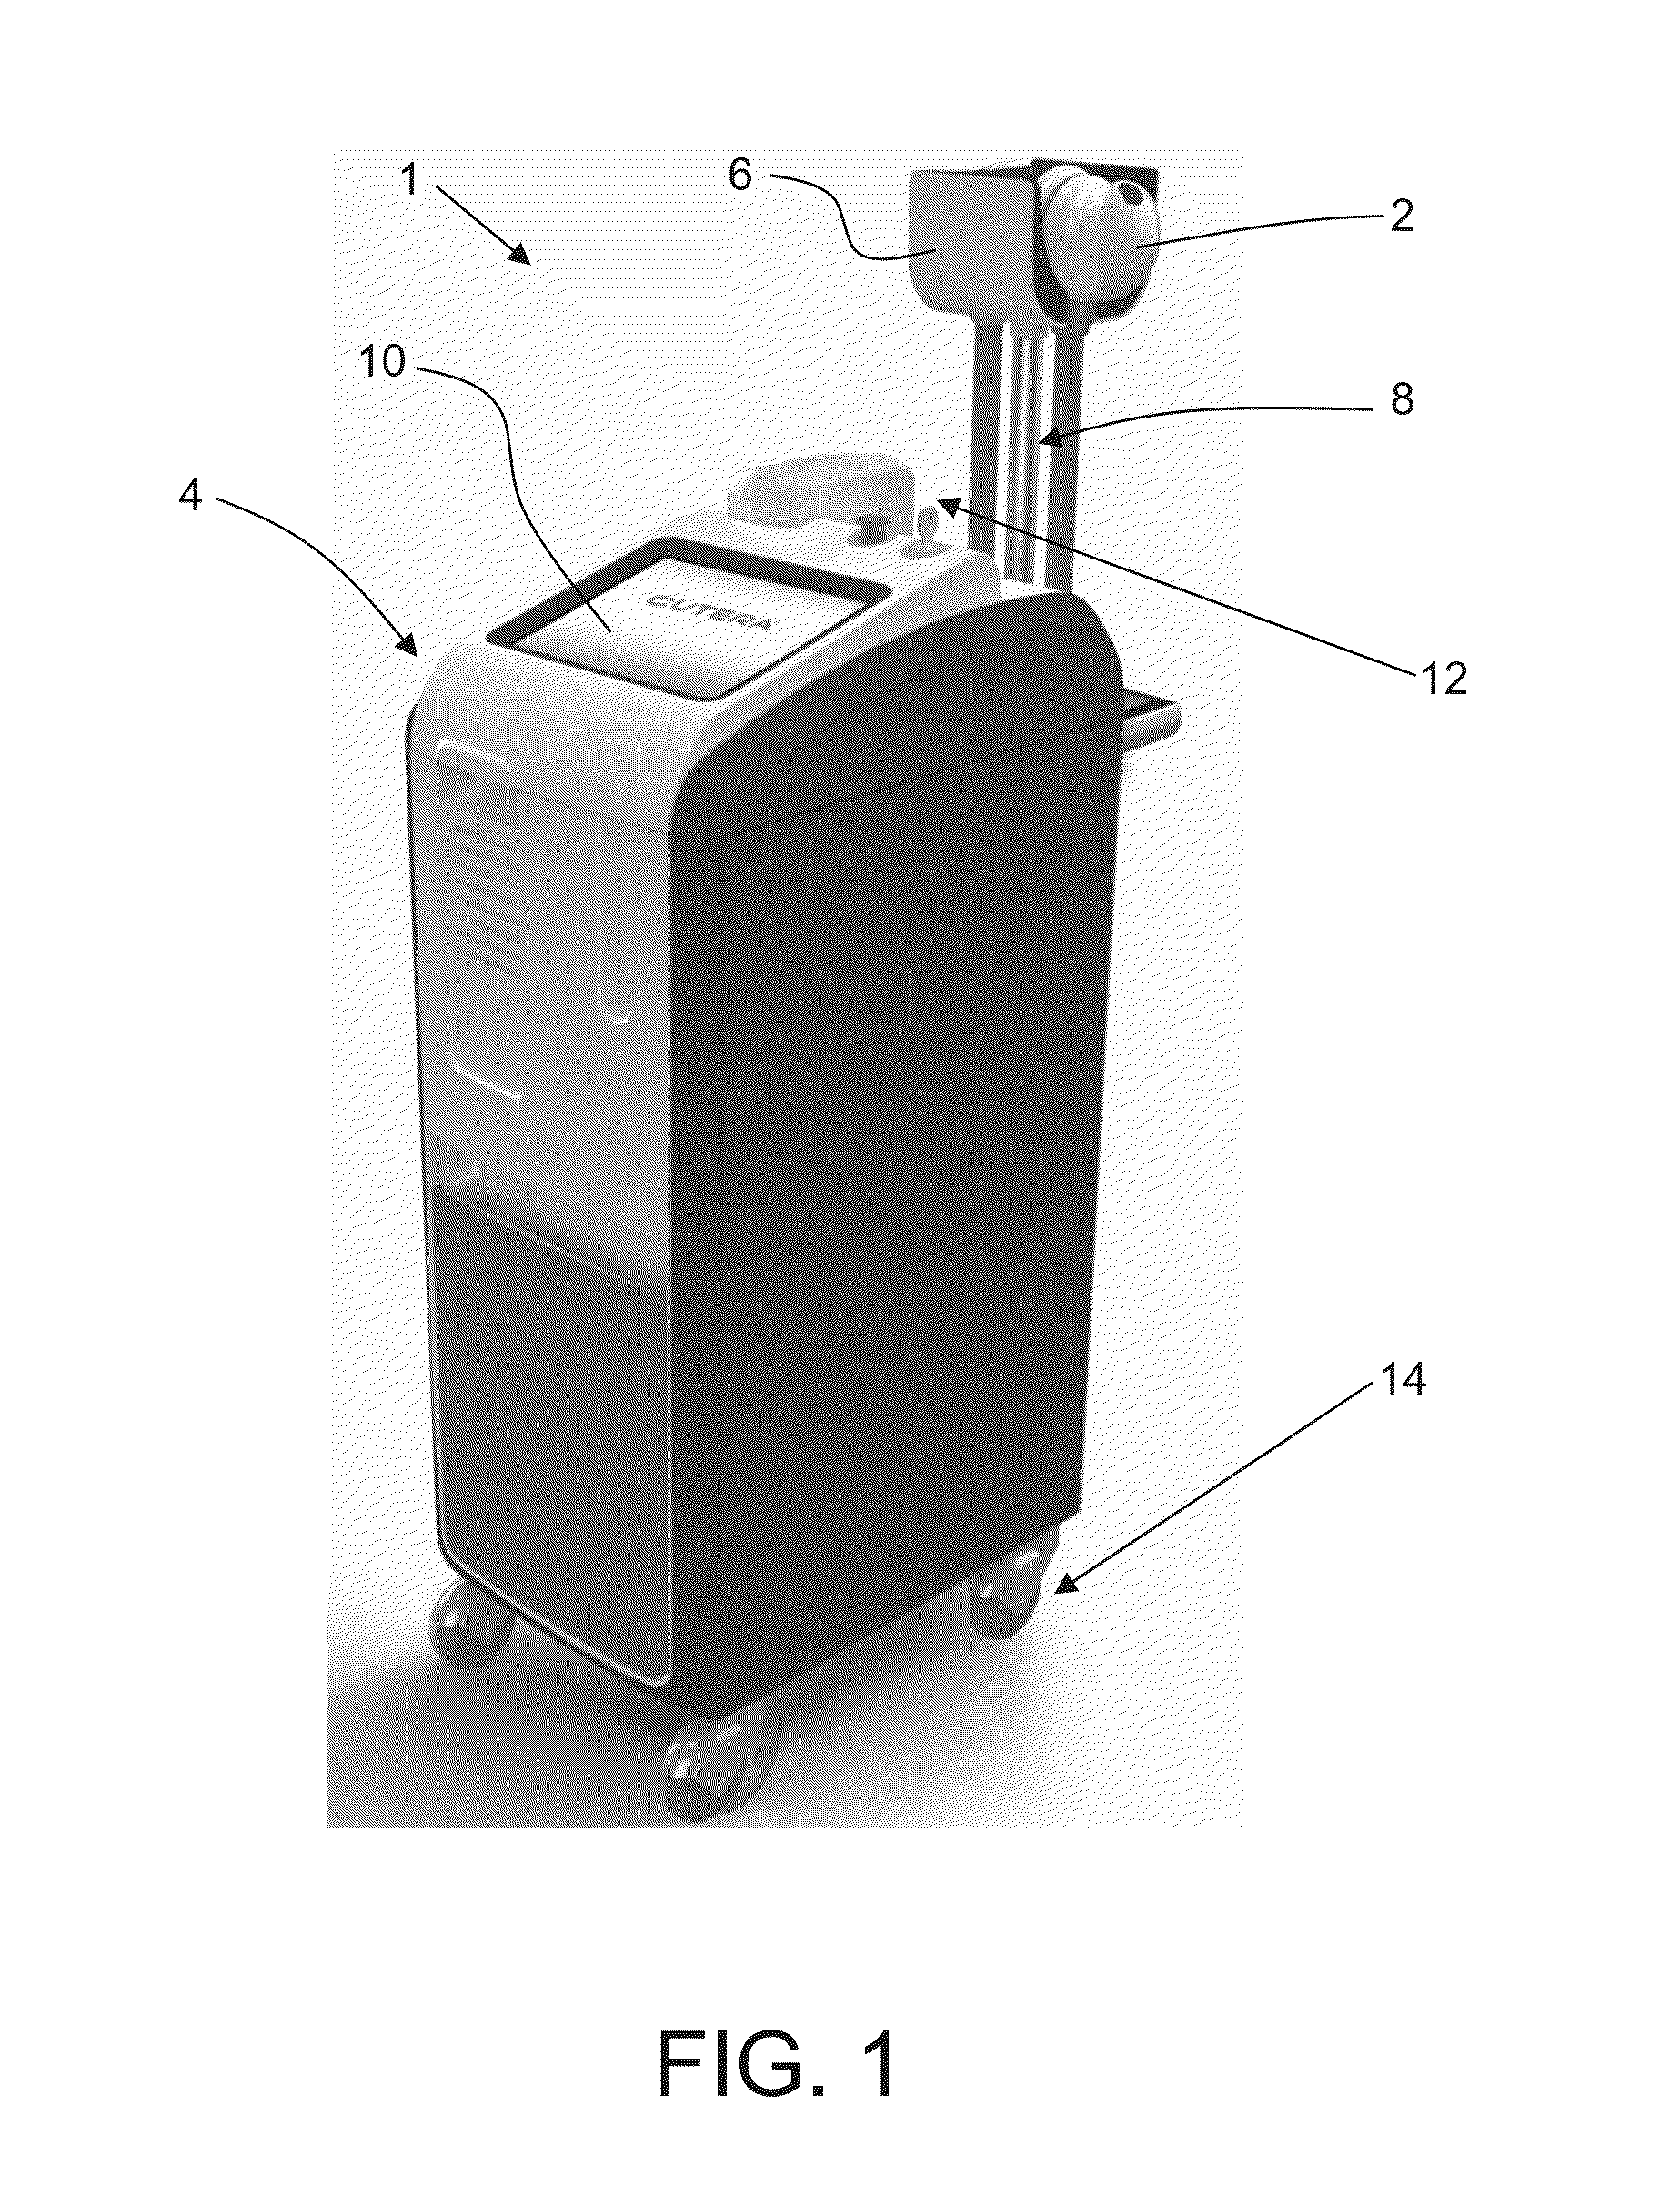 Systems and methods for thermolipolysis using RF energy